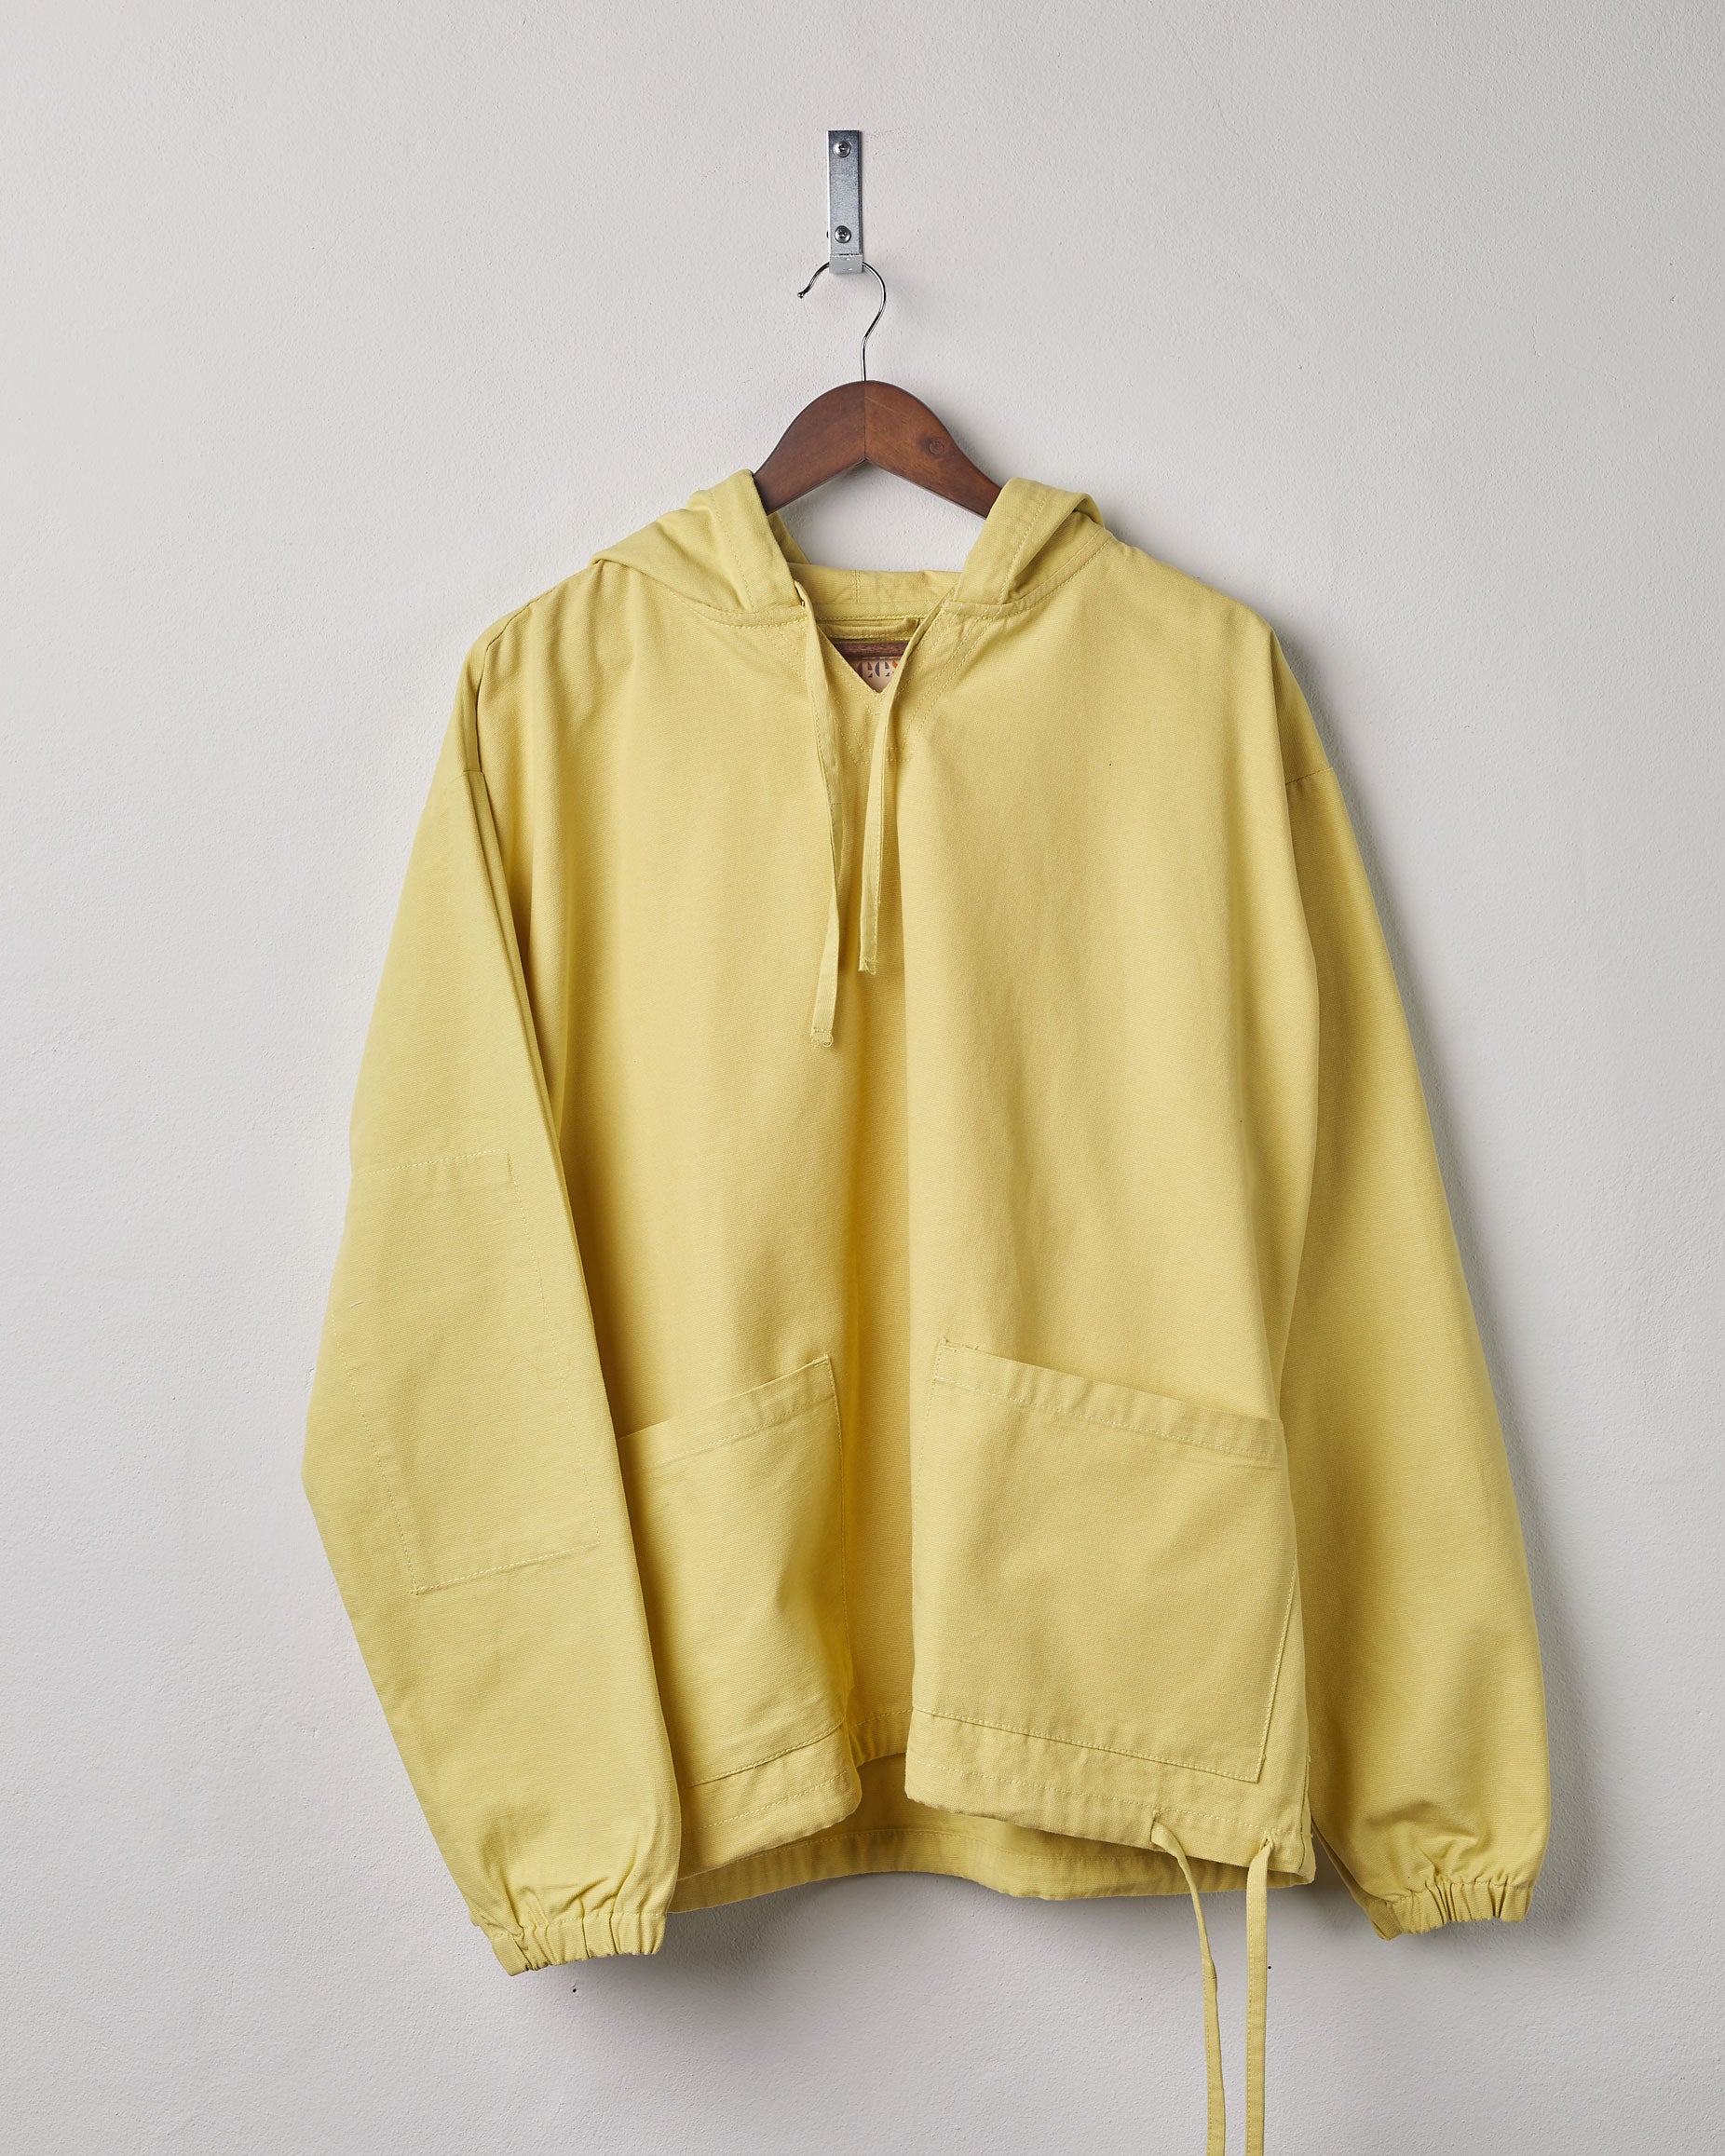 Full-length front view of 'lime' coloured smock from Uskees presented on hanger.